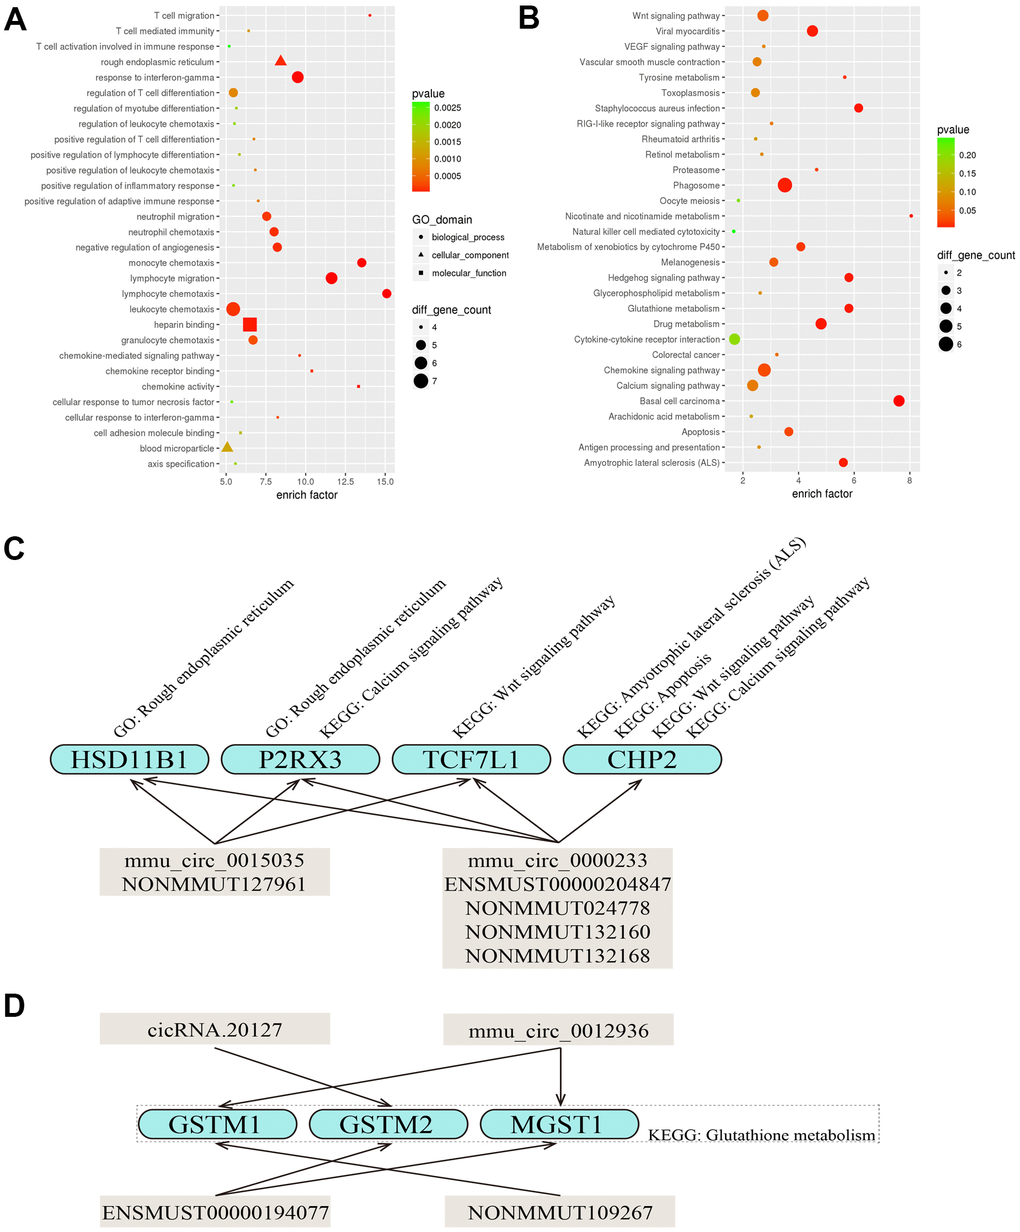 Predicted functions of the DEcircRNAs/DElncRNAs involved in the DEcircRNA/DElncRNA-miRNA-DEmRNA network. (A, B) The top 30 most significantly enriched GO (A) and KEGG (B) pathways of the DEmRNAs that were targets of the five DEcircRNAs (mmu